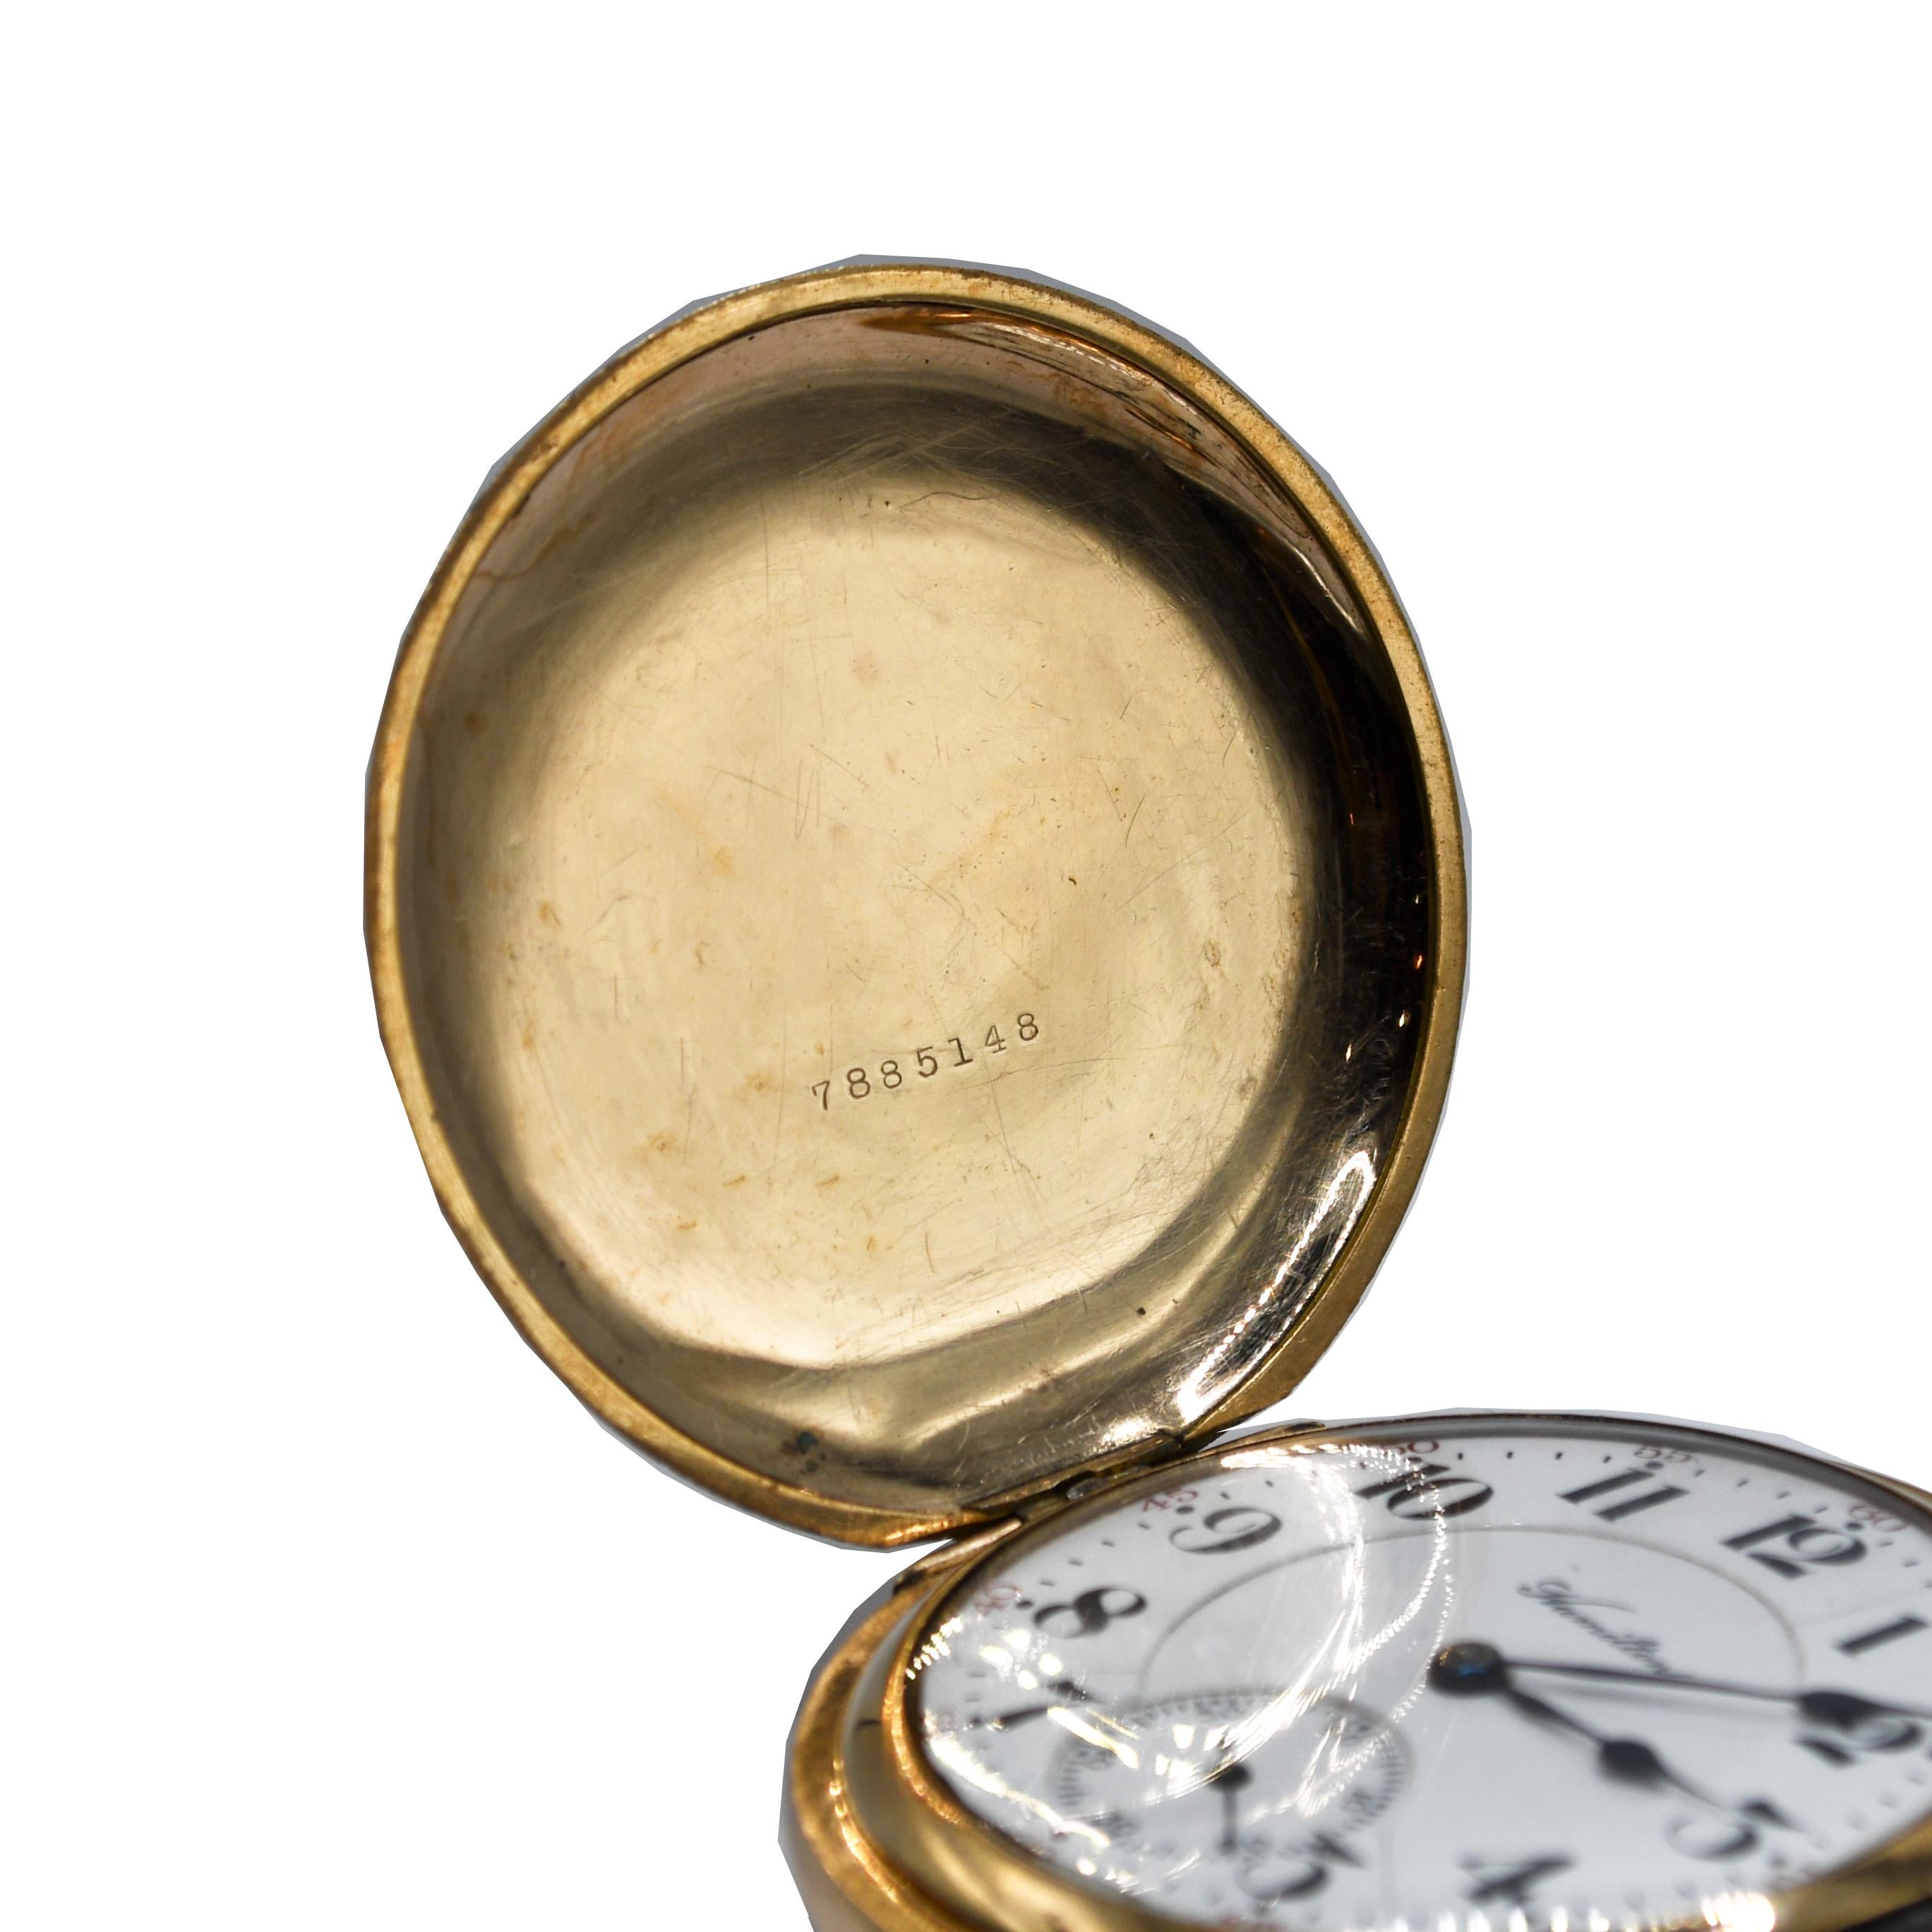 Hamilton Gold Filled Pocket Watch, 21 jewels, Size 16 For Sale 3